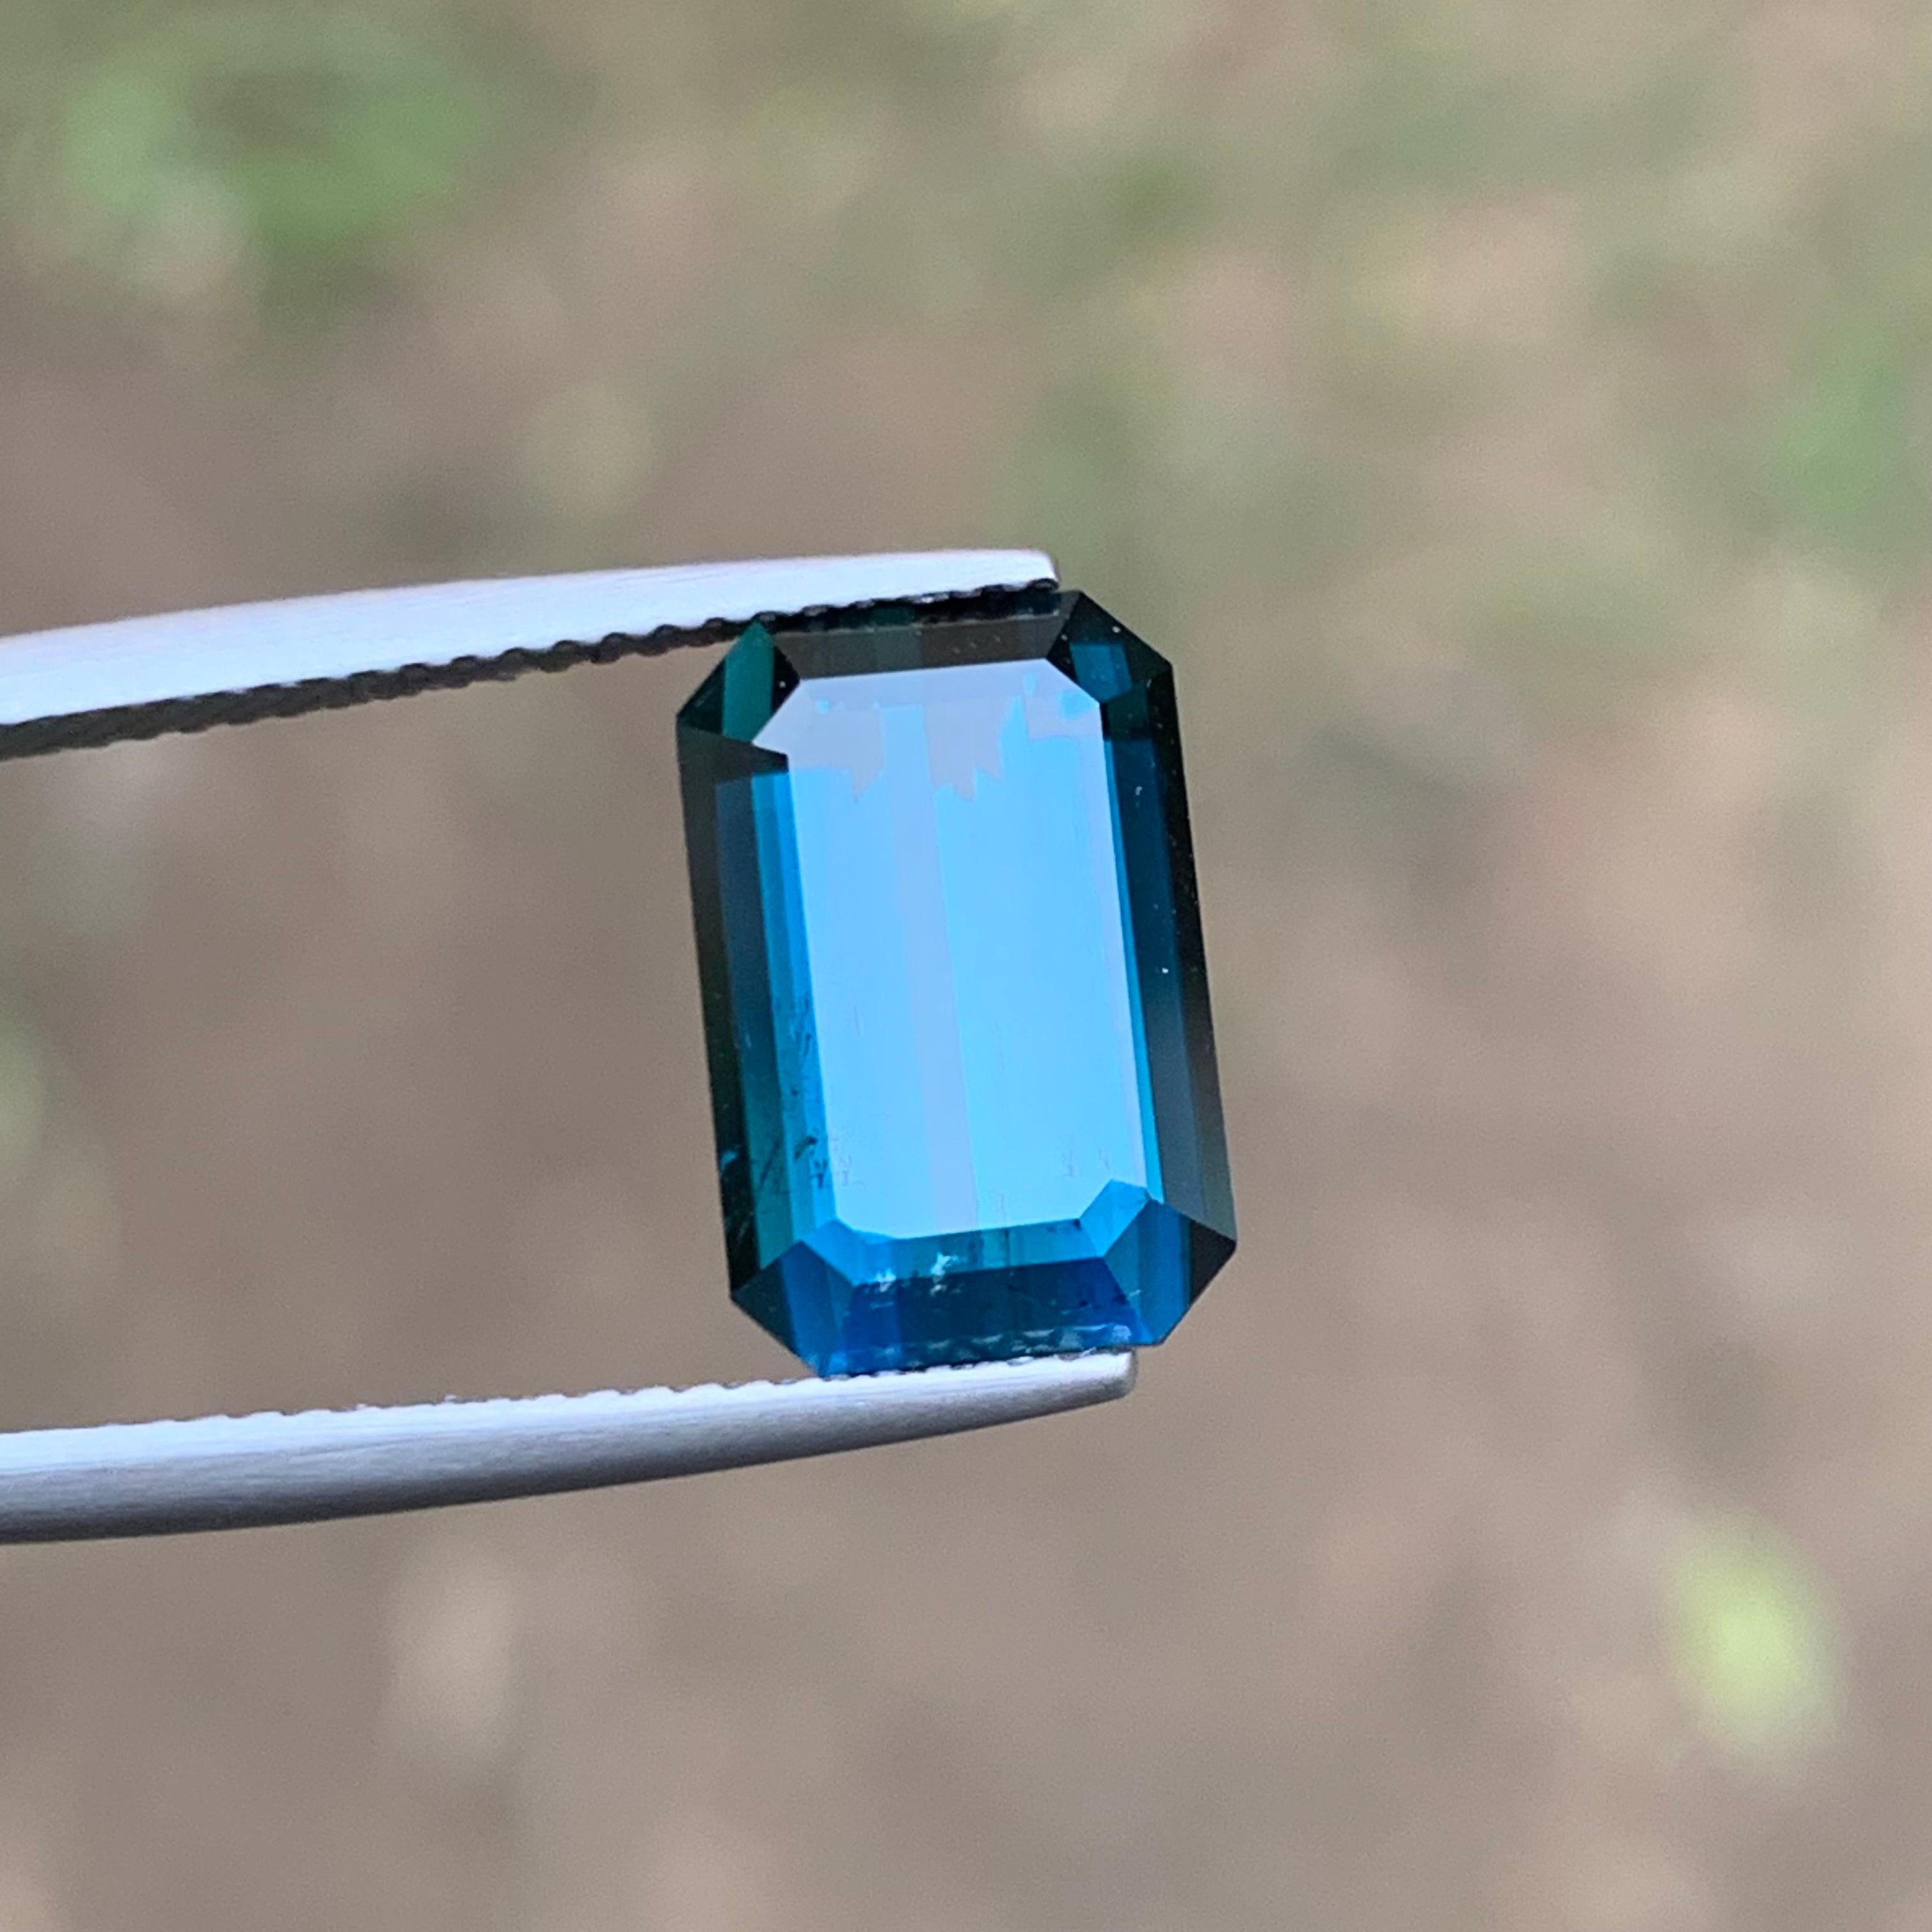 Rare Deep Inky Blue Natural Tourmaline Gemstone, 6.15 Ct Emerald Cut for Ring Af 3